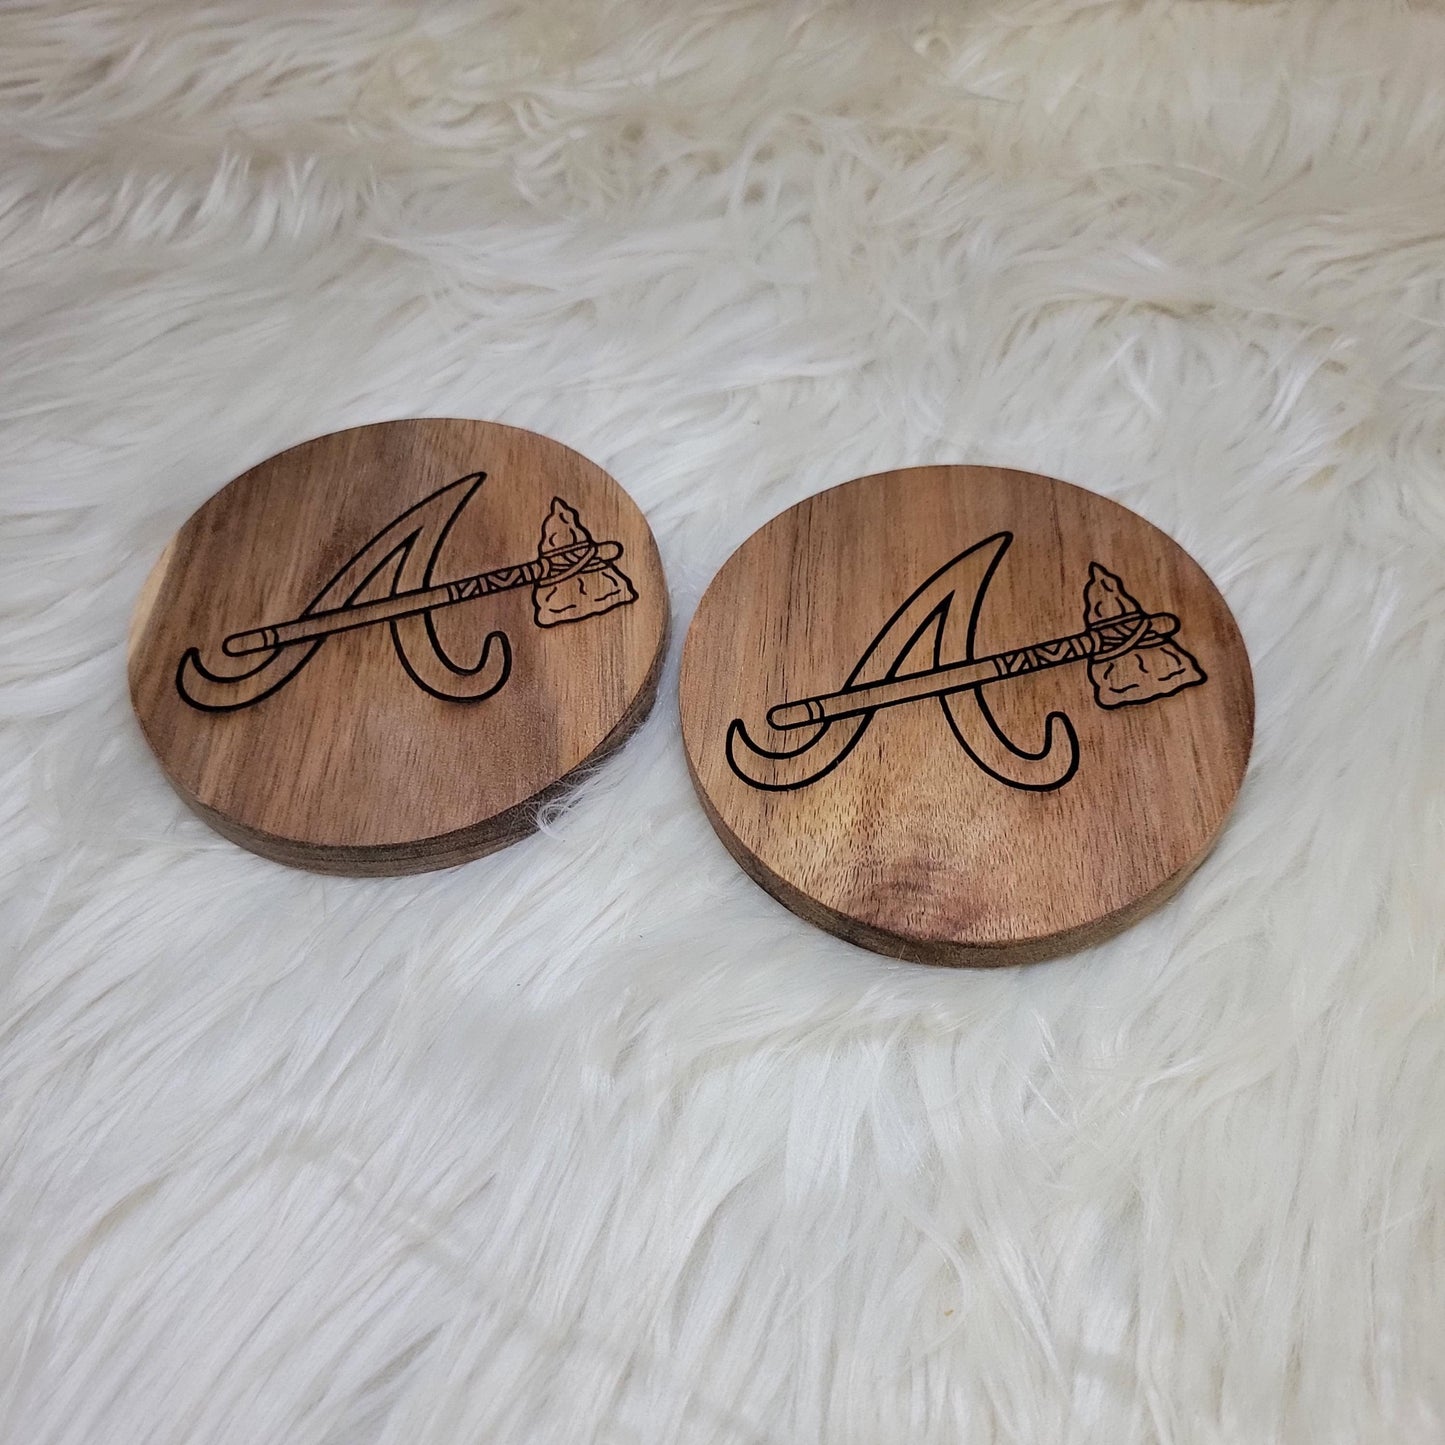 Braves Inspired Coasters